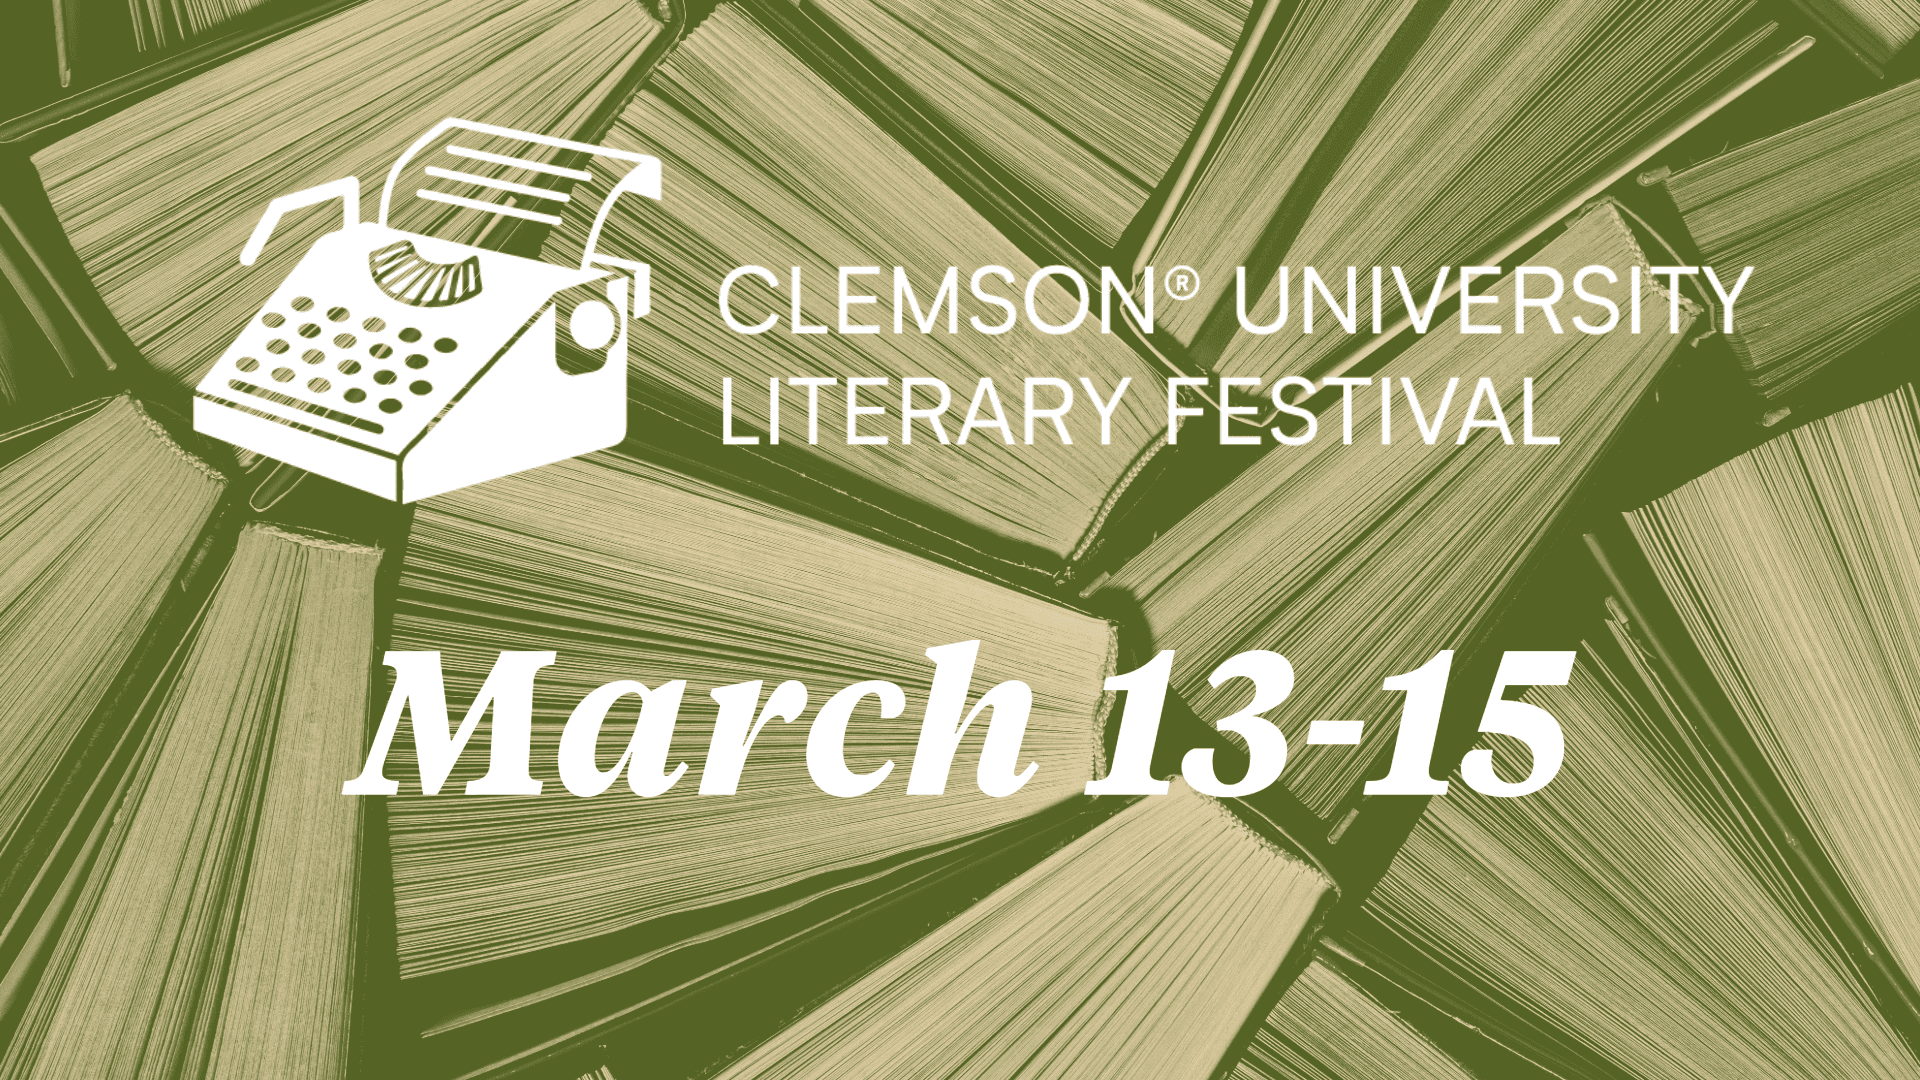 An image showing a typewriter and the dates of the 17th Clemson University Literary Festival, which happens March 13-15, 2024.